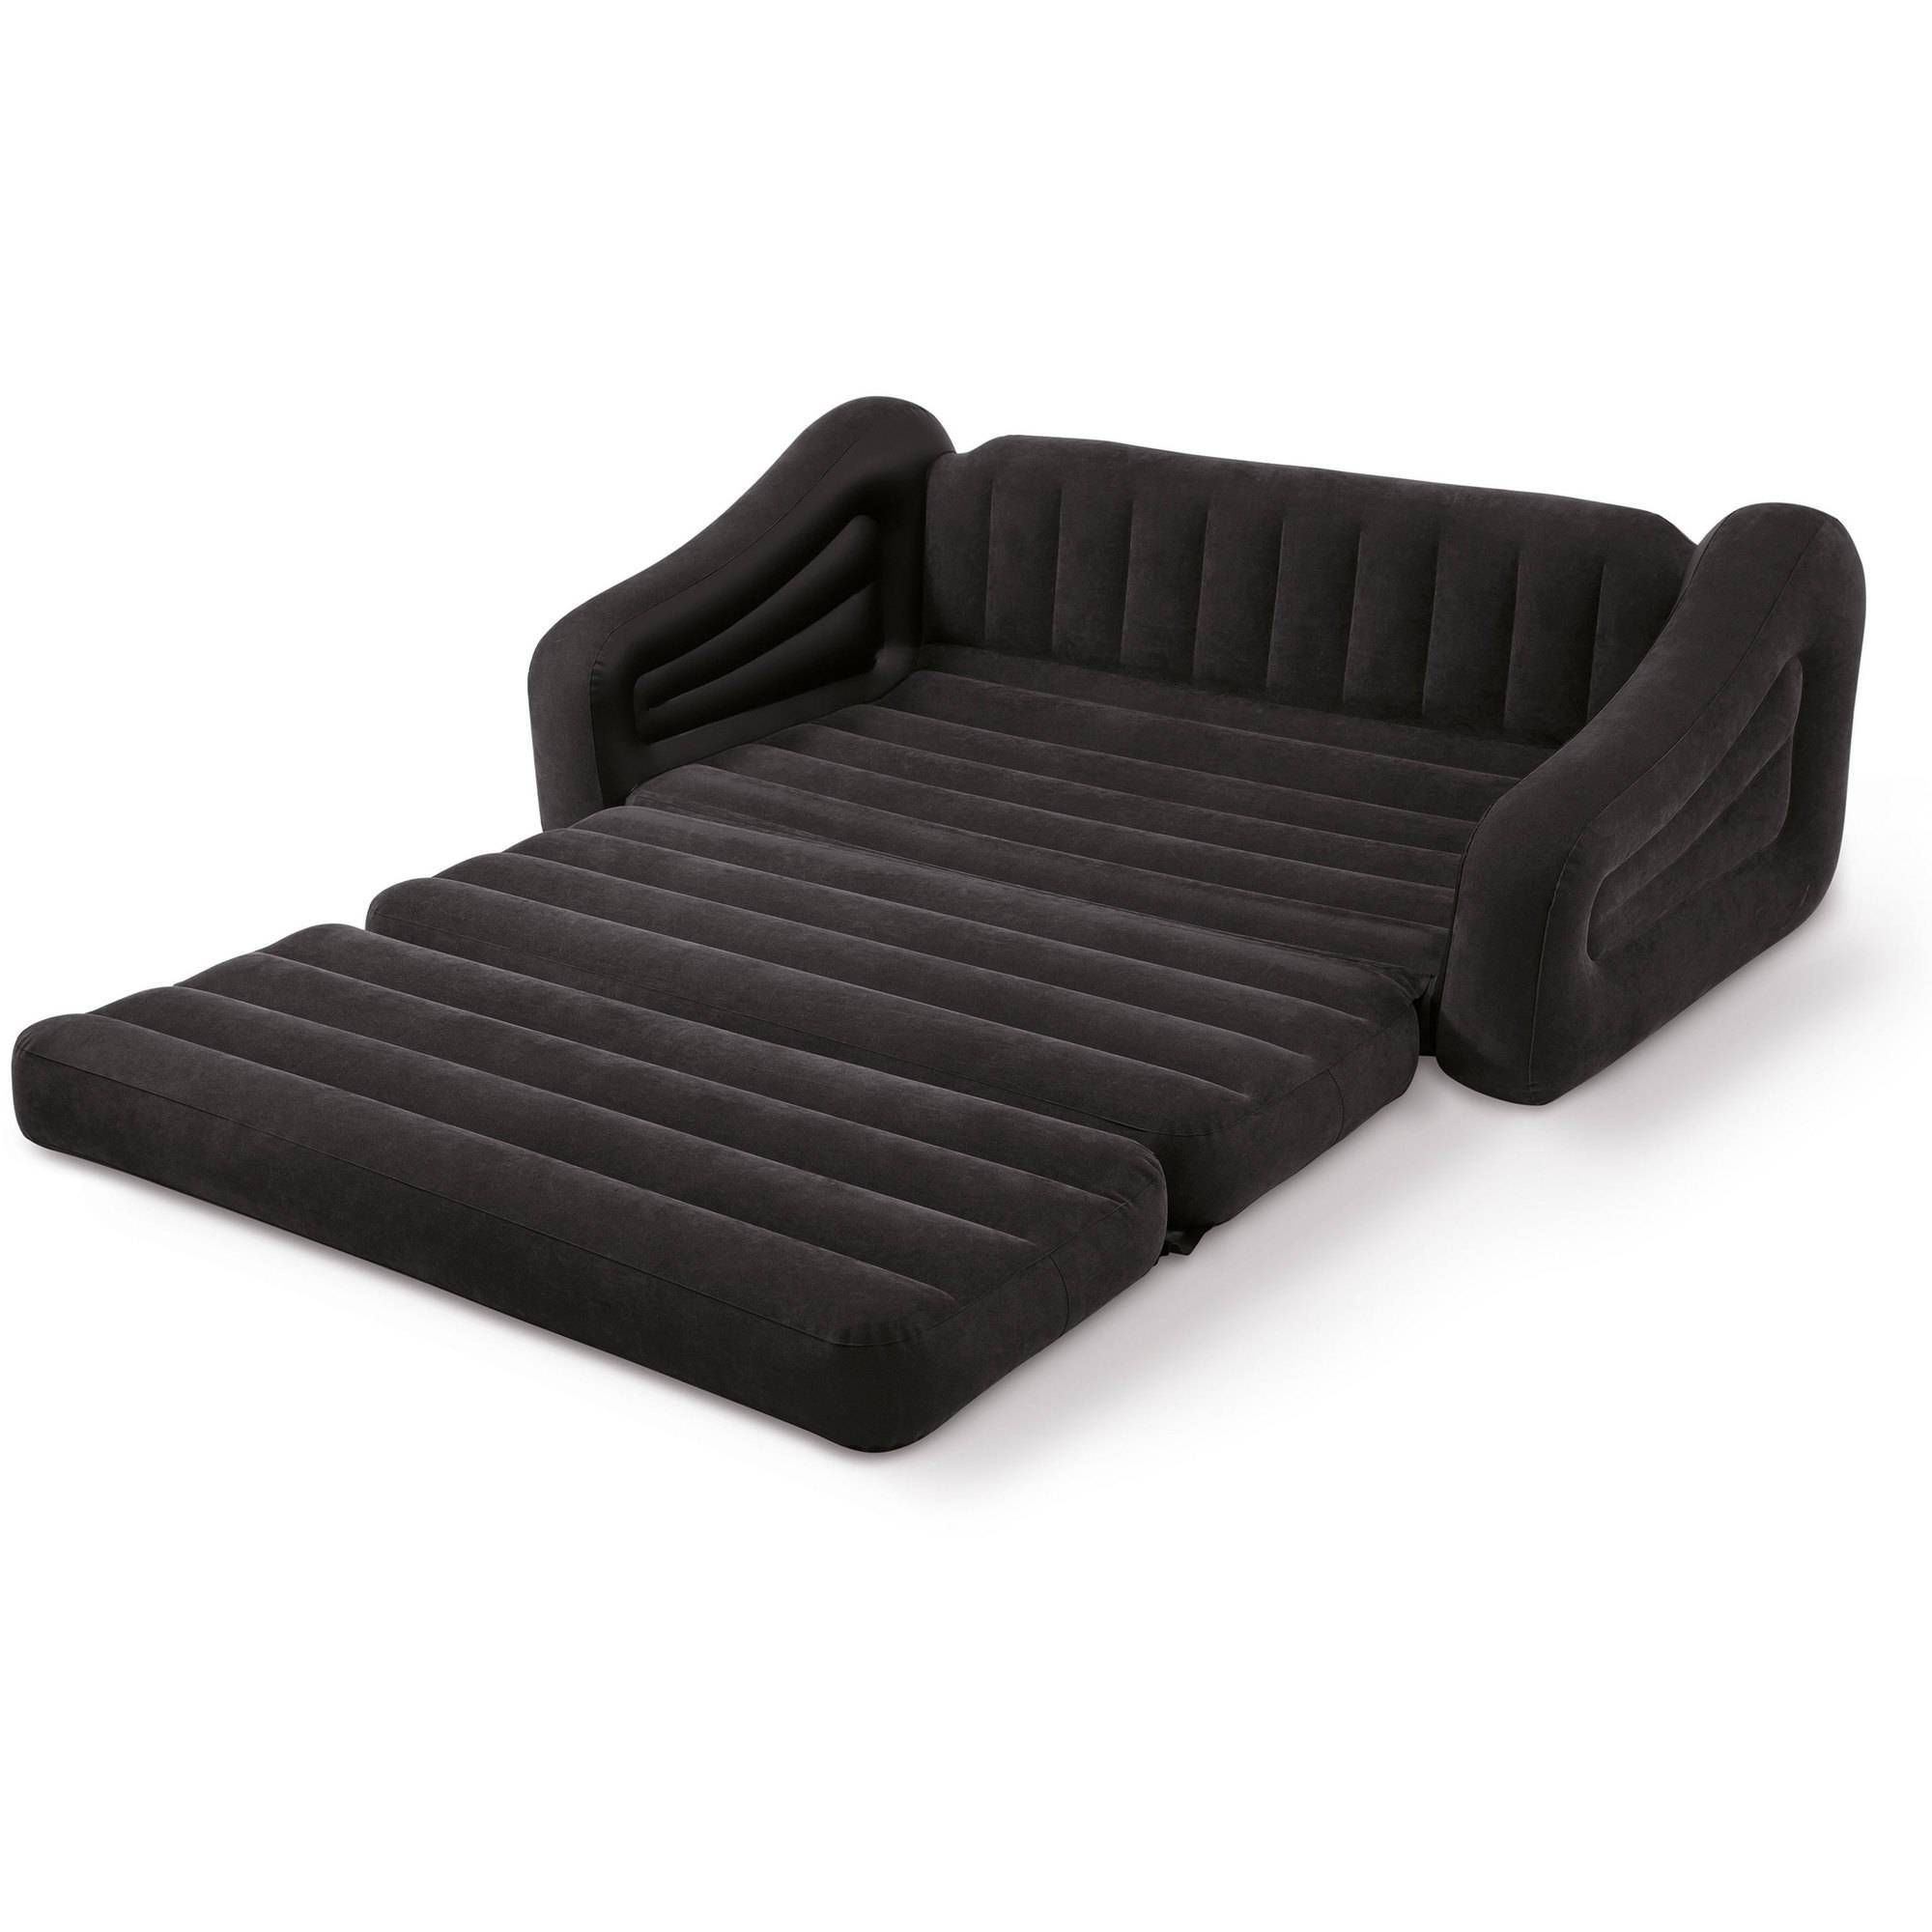 Intex Queen Inflatable Pull Out Sofa Bed – Walmart With Regard To Intex Sleep Sofas (View 3 of 15)